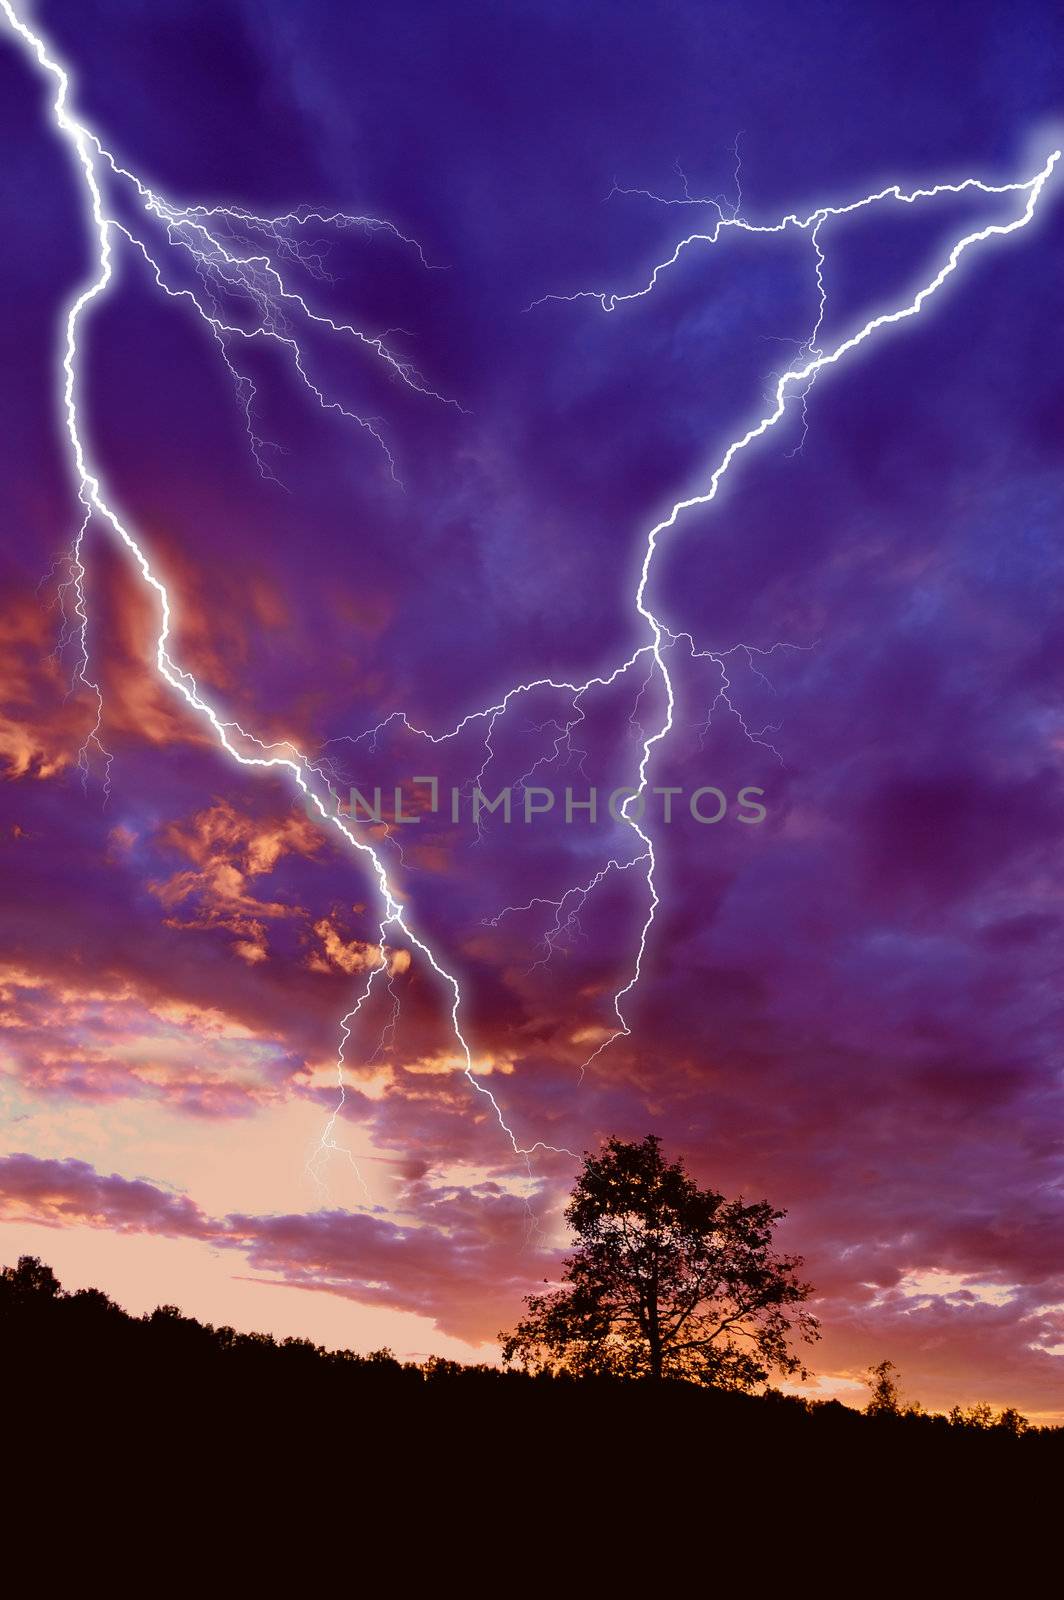 tree silhouette at sunset under dramatic sky with lightning